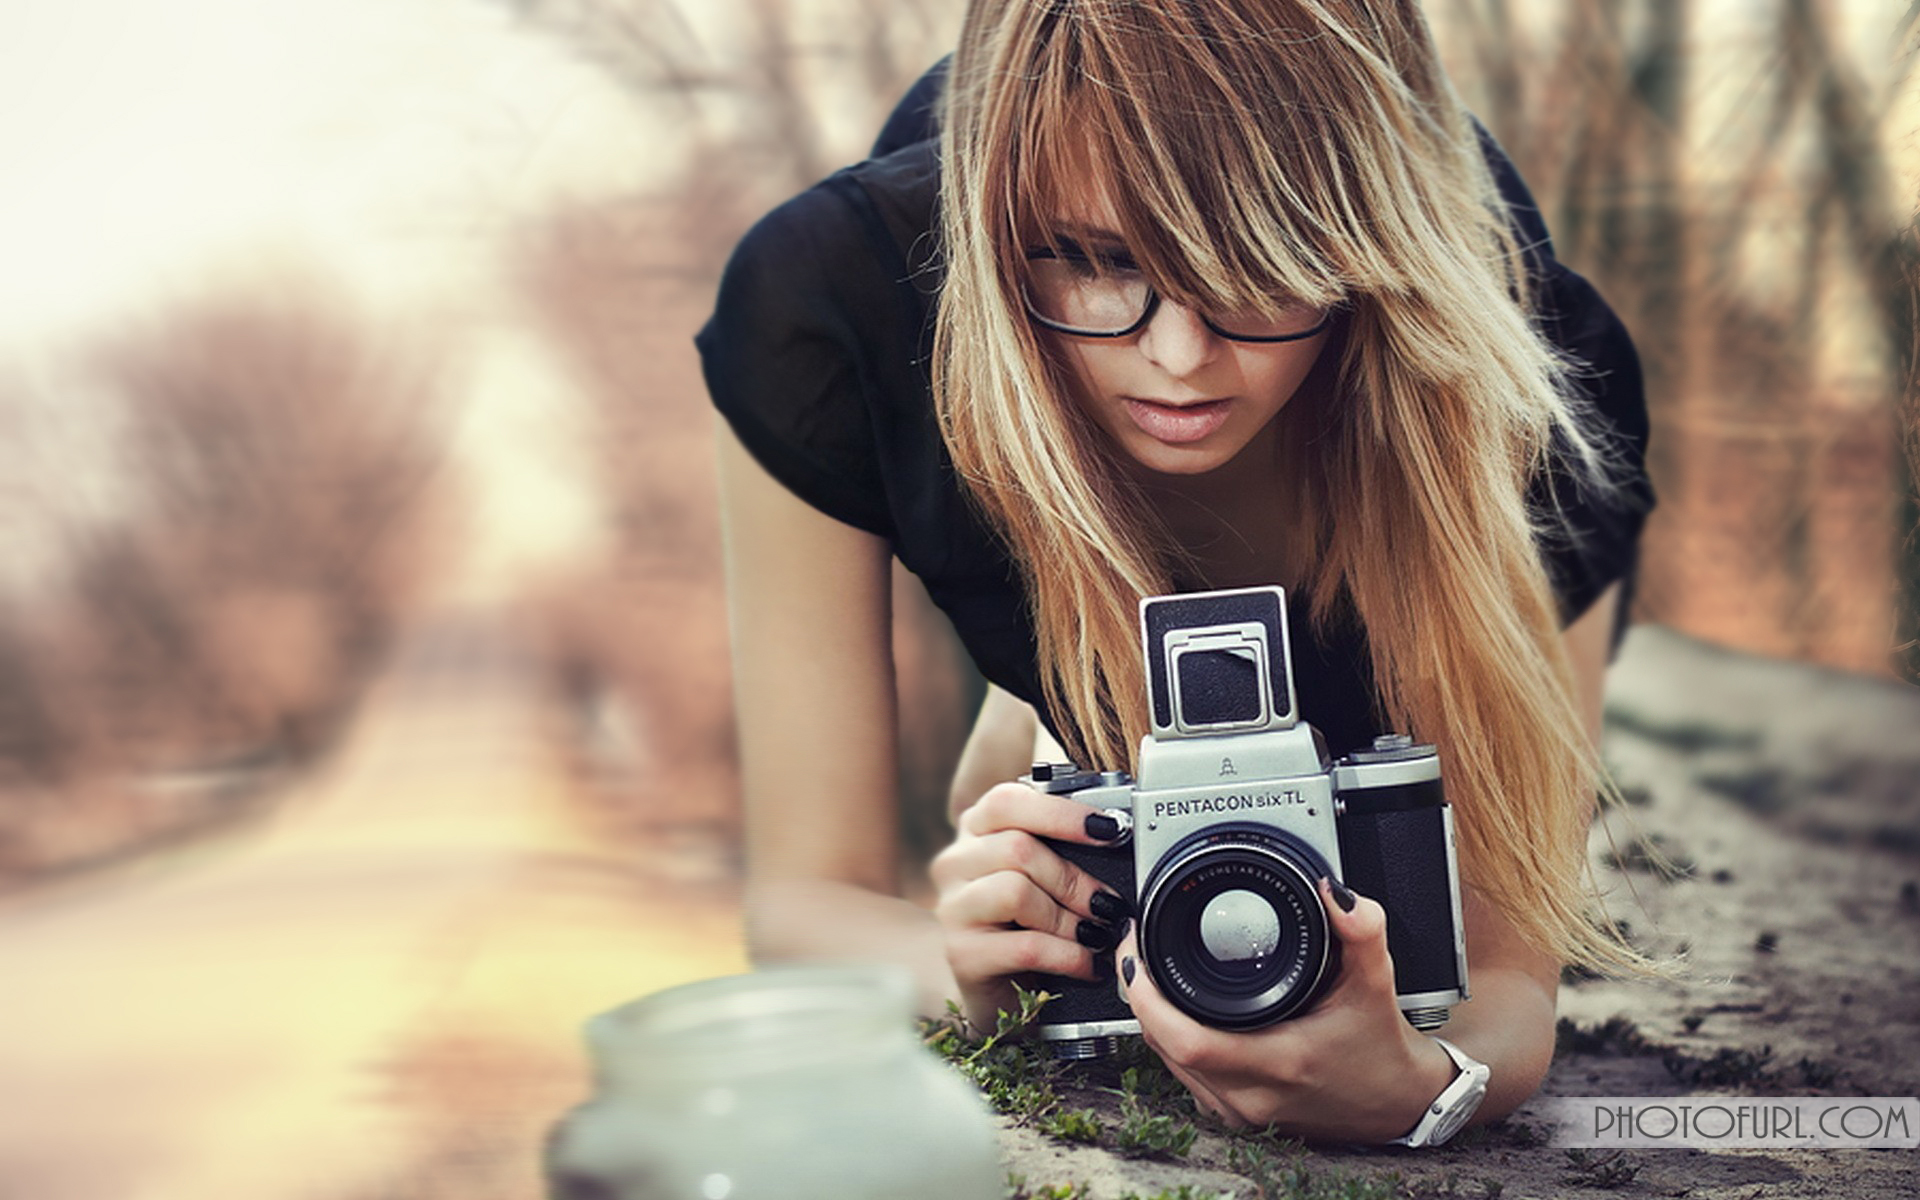 High Resolution Girls Wallpaper Free Download - Woman With A Camera , HD Wallpaper & Backgrounds